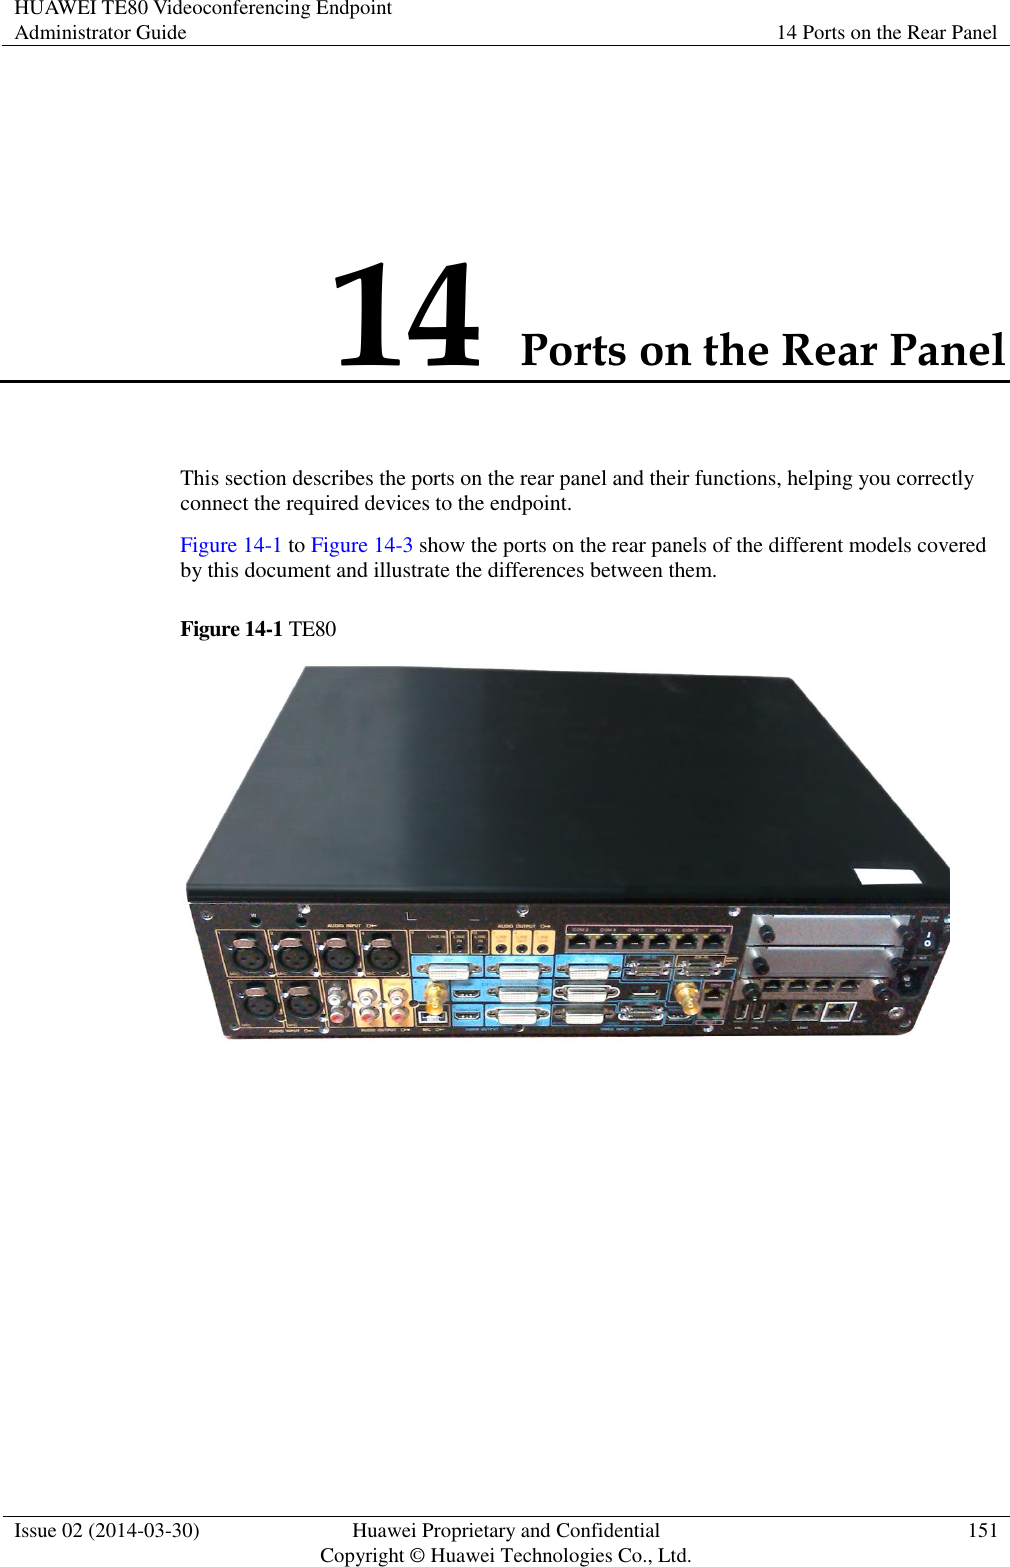 HUAWEI TE80 Videoconferencing Endpoint Administrator Guide 14 Ports on the Rear Panel  Issue 02 (2014-03-30) Huawei Proprietary and Confidential Copyright © Huawei Technologies Co., Ltd. 151  14 Ports on the Rear Panel This section describes the ports on the rear panel and their functions, helping you correctly connect the required devices to the endpoint. Figure 14-1 to Figure 14-3 show the ports on the rear panels of the different models covered by this document and illustrate the differences between them. Figure 14-1 TE80  